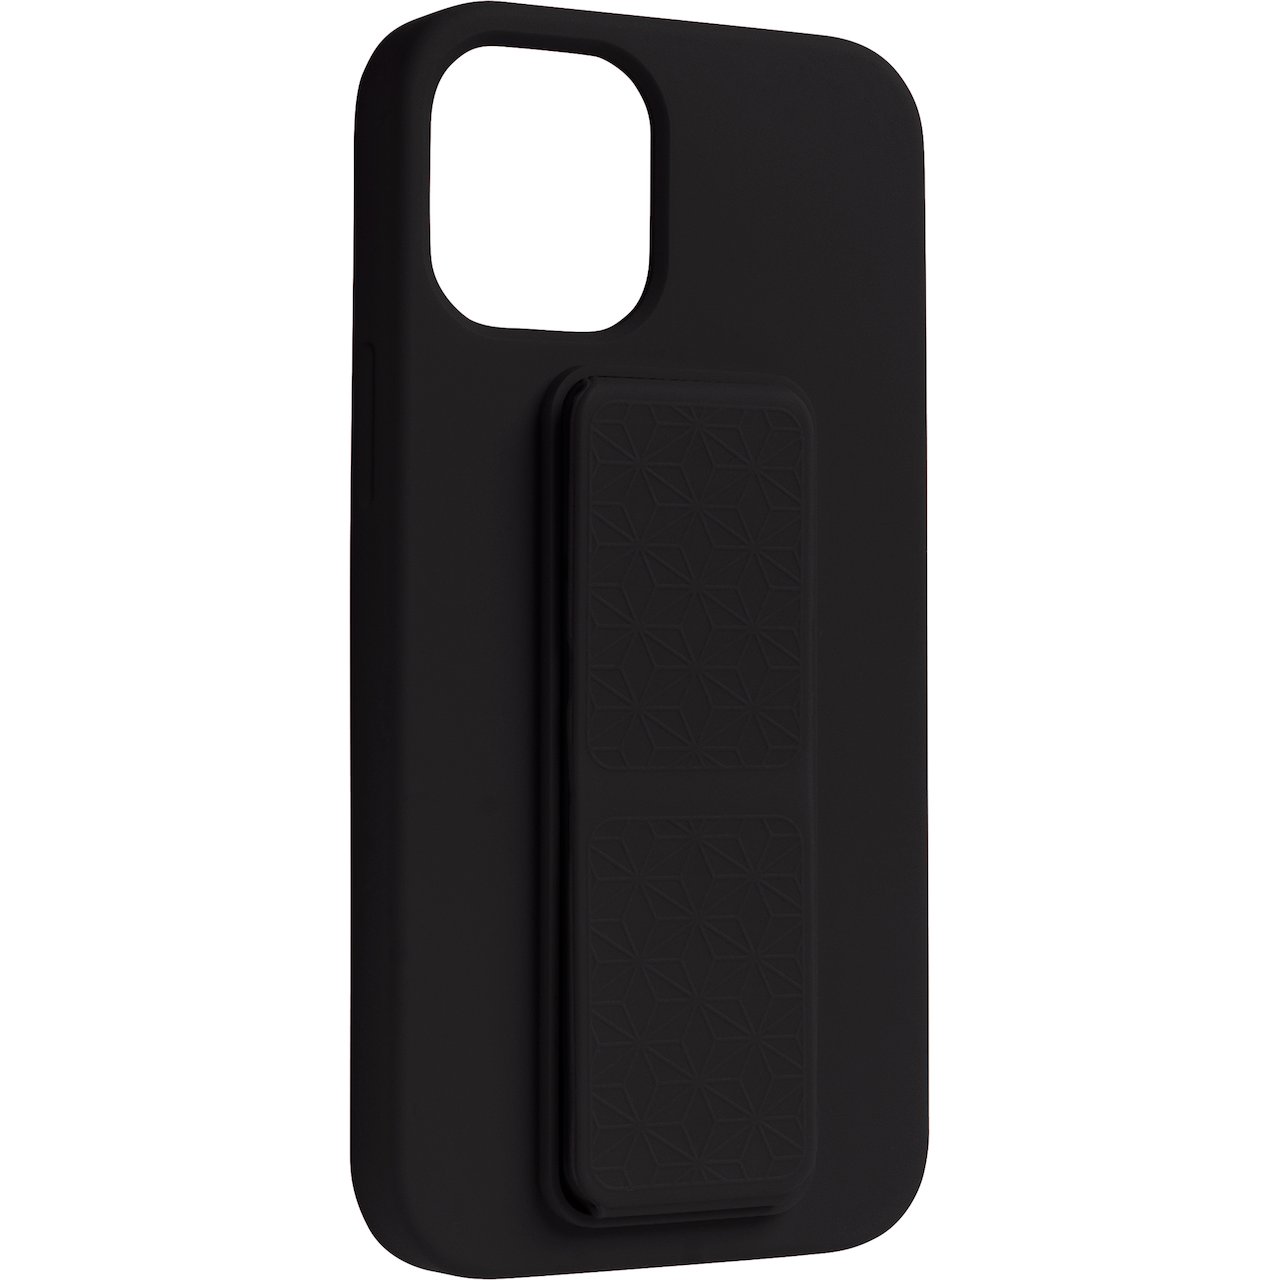 LEKI BYCPH COVER TIL IPHONE 12/12 PRO GRIP AND STAND SILIKON SORT